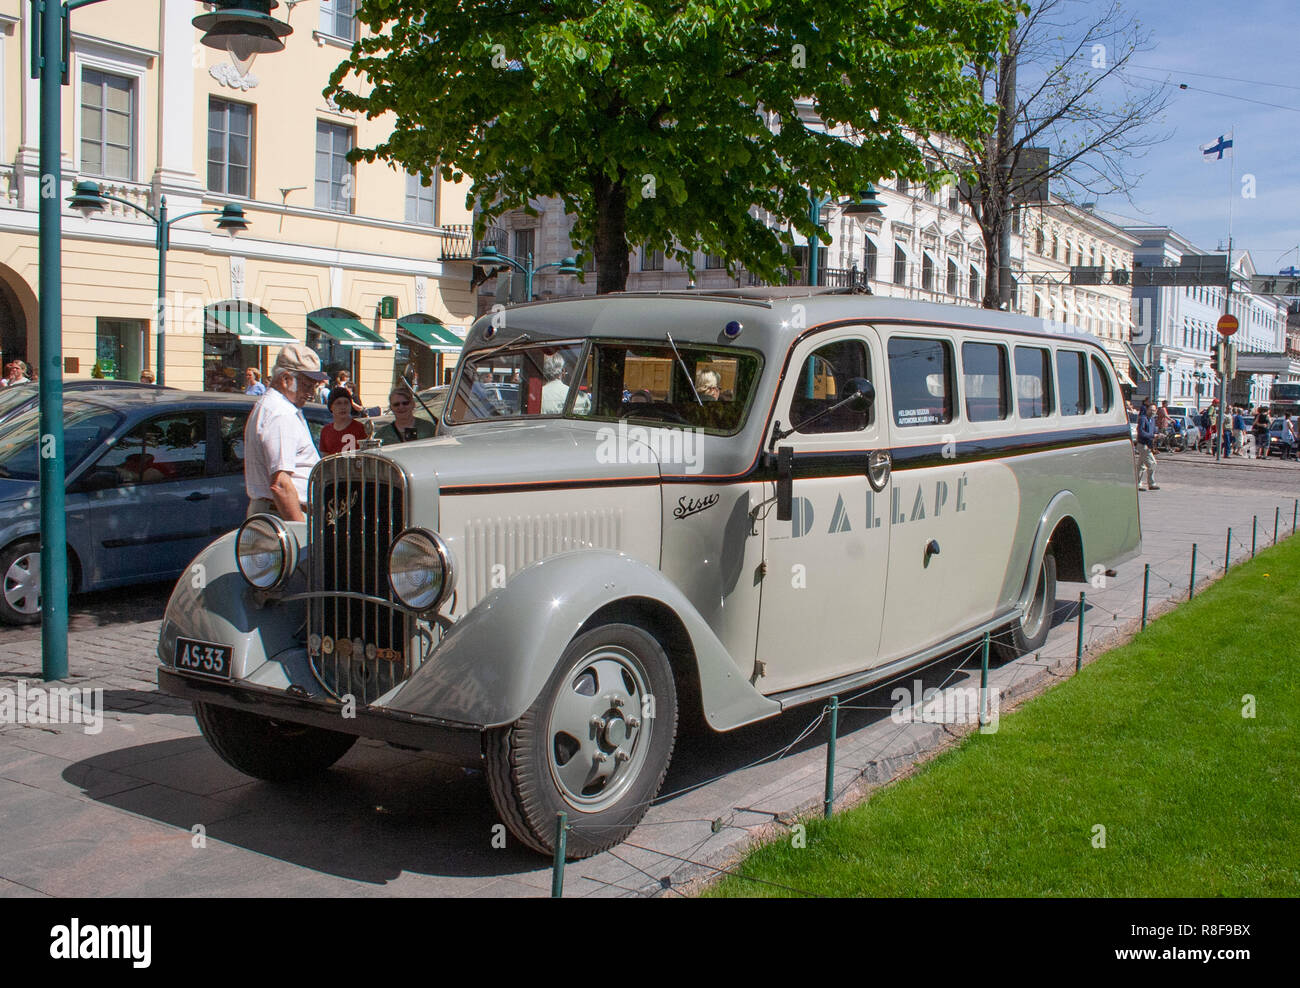 Historic vehicle, Sisu 322 bus from the year 1933 restored to its appearance while serving the Helsinki Jazz band 'Dallapé'. Stock Photo